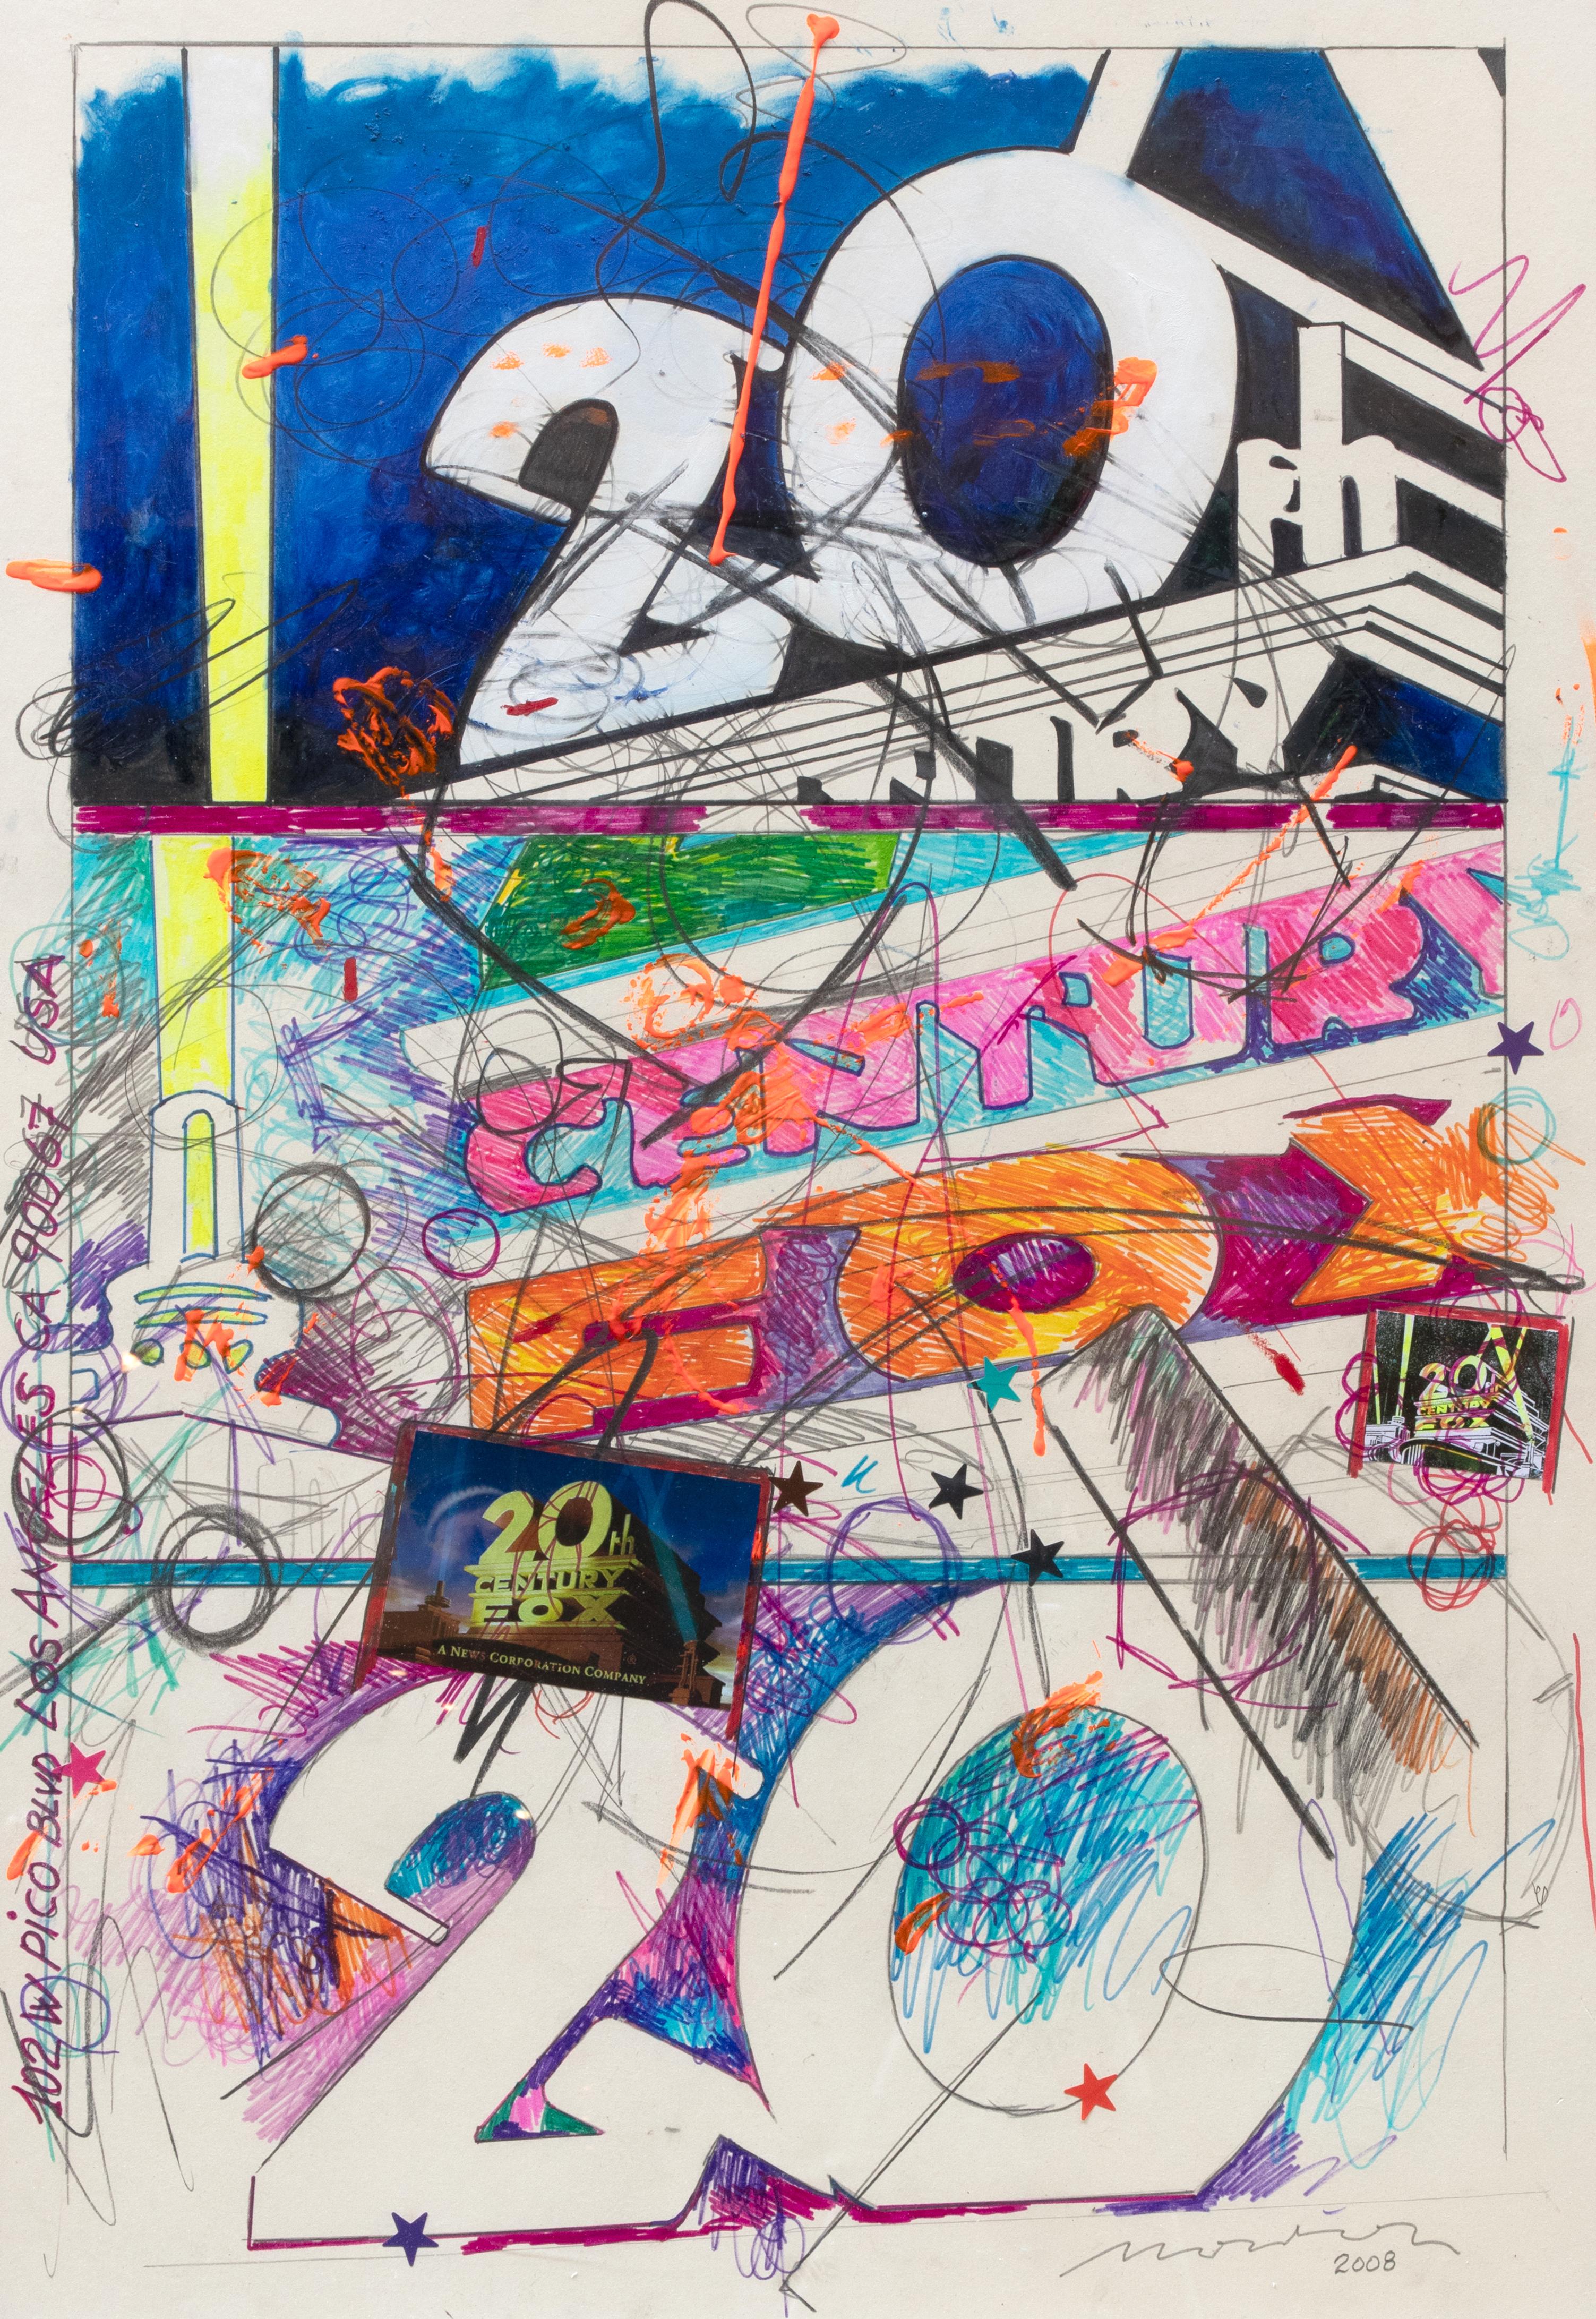 20th Century Fox - Mixed Media by Enrico Manera - 2008 For Sale 1